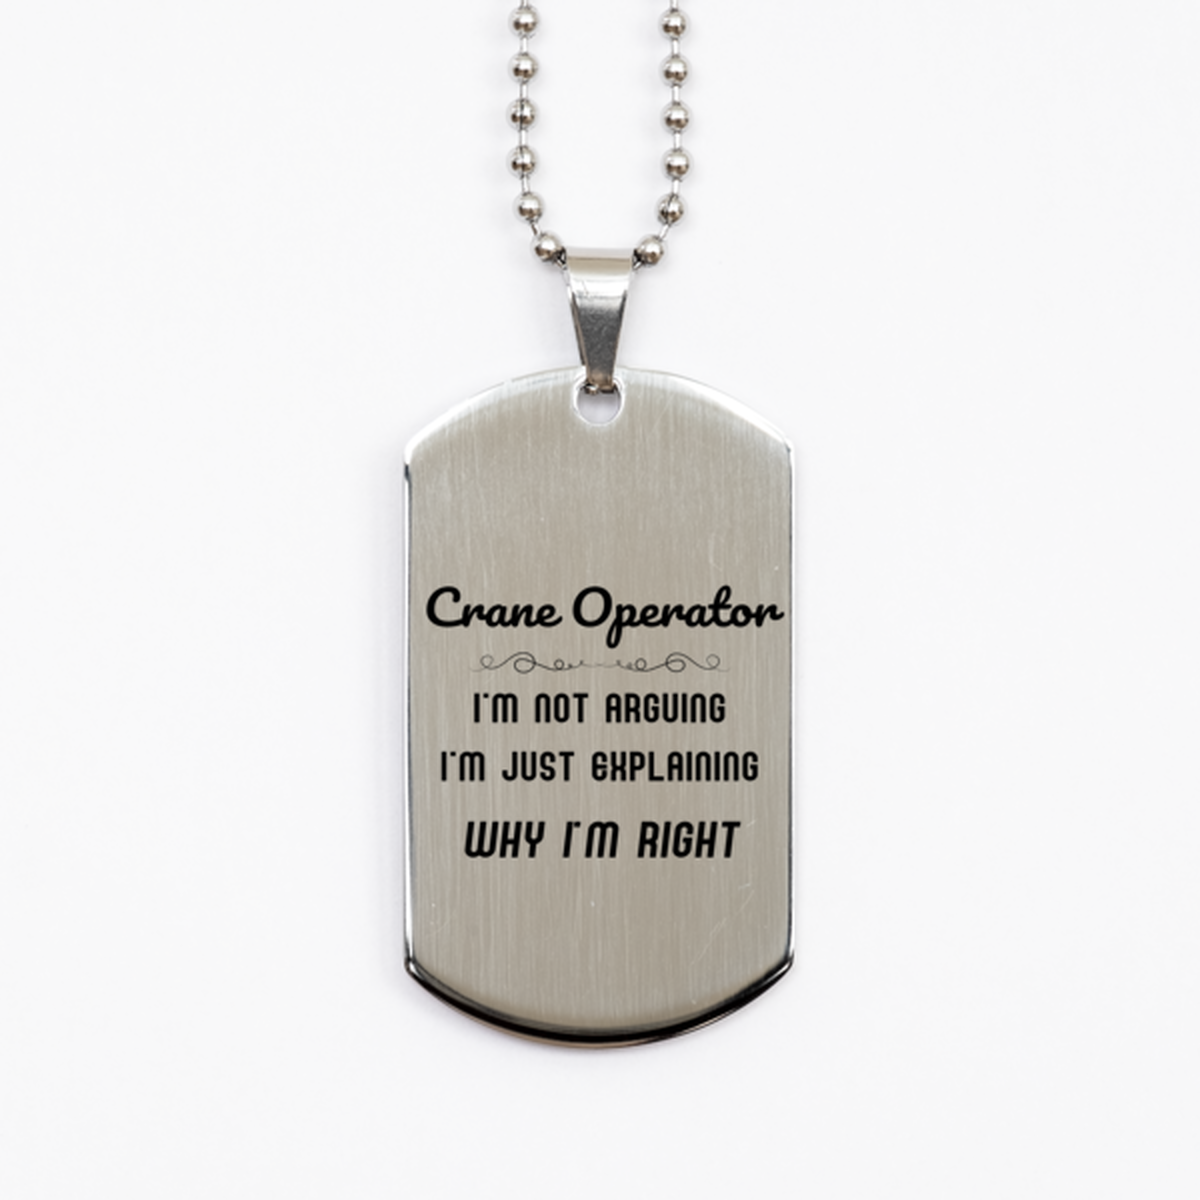 Crane Operator I'm not Arguing. I'm Just Explaining Why I'm RIGHT Silver Dog Tag, Funny Saying Quote Crane Operator Gifts For Crane Operator Graduation Birthday Christmas Gifts for Men Women Coworker